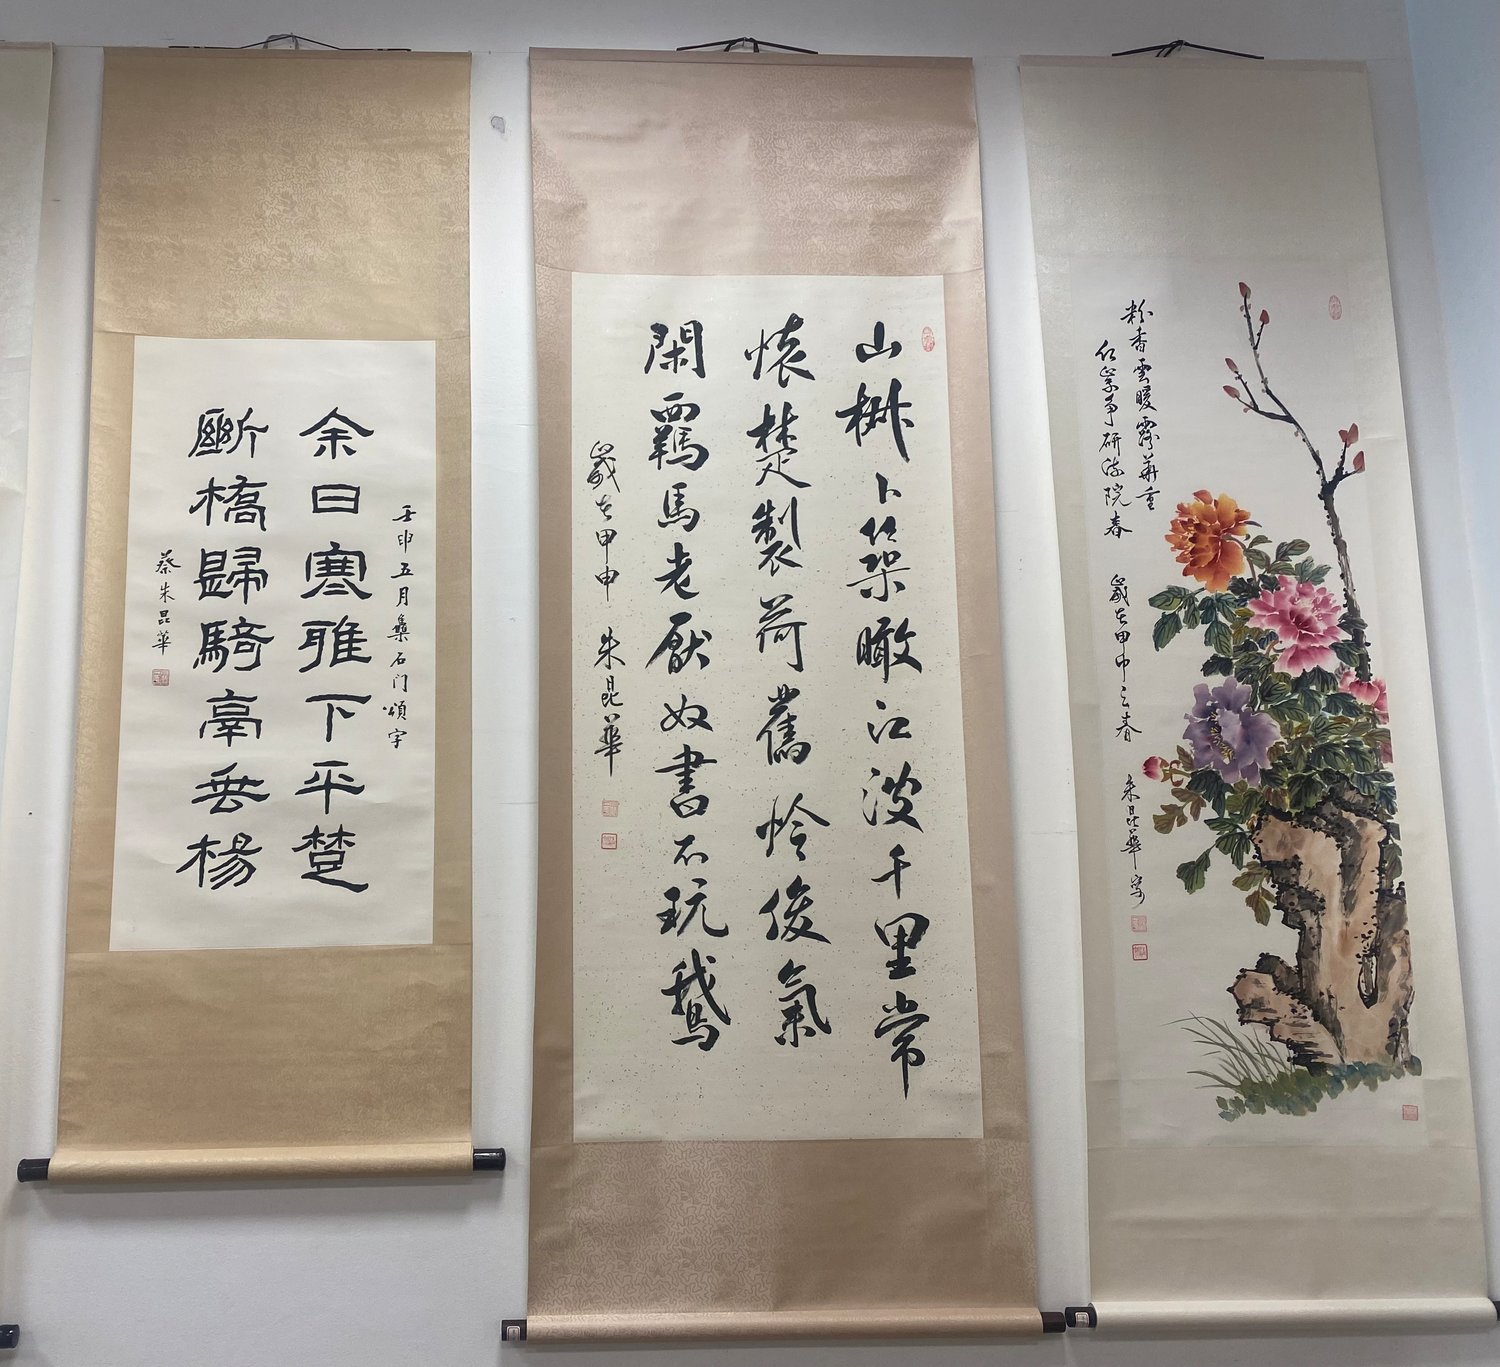 Artwork by artist Winnie Tsai, a Chinese artist who specializes in Chinese calligraphy and Chinese watercolor painting, is currently being exhibited at the IAC gallery.